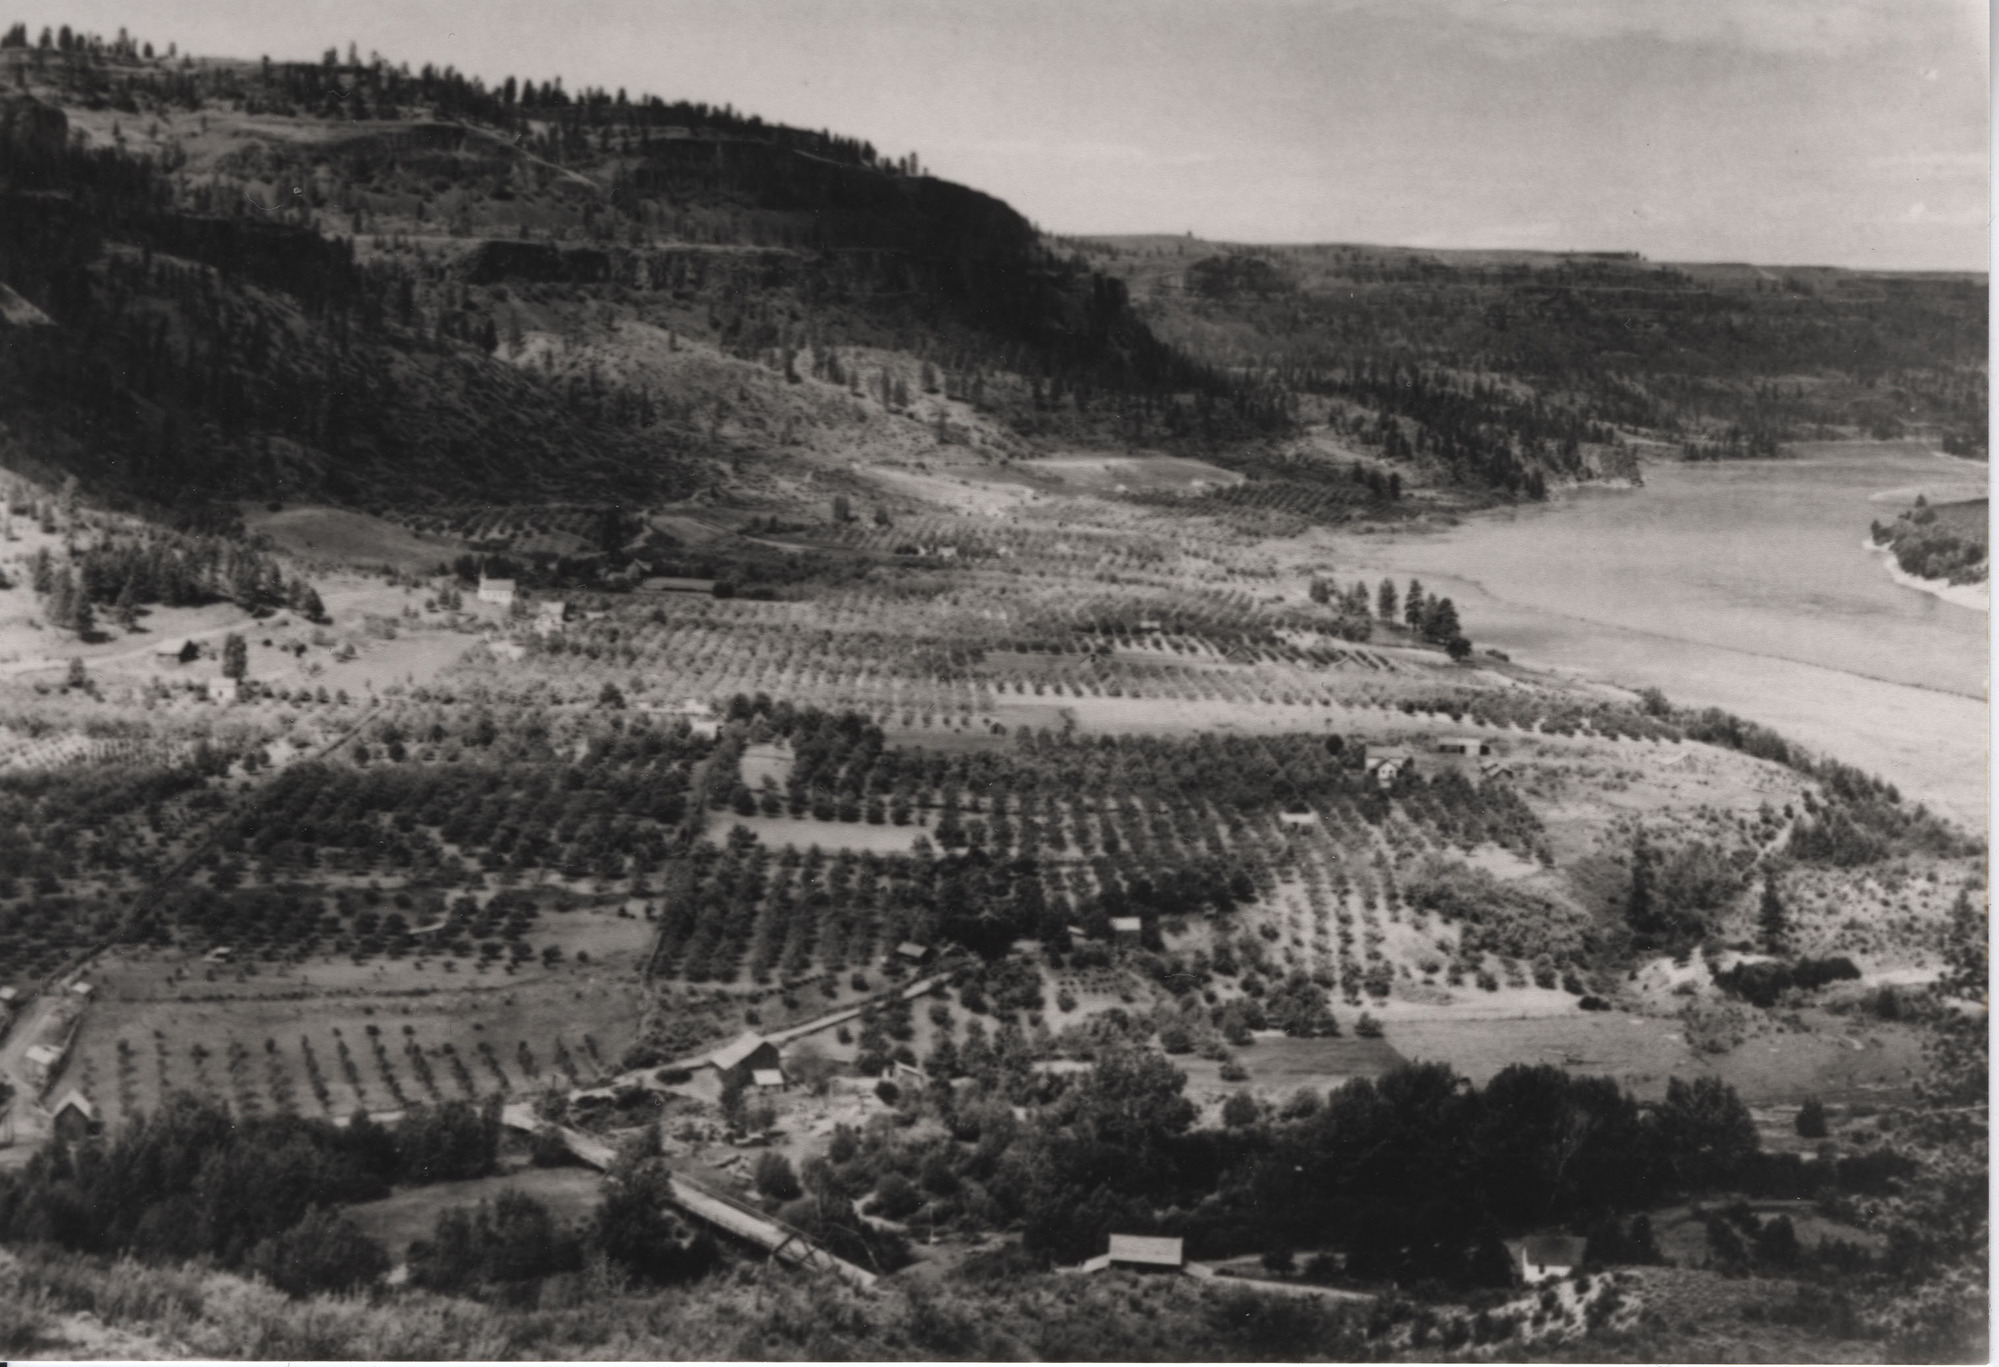 Black and white photograph of orchards next to a body of water with steep cliffs in the background